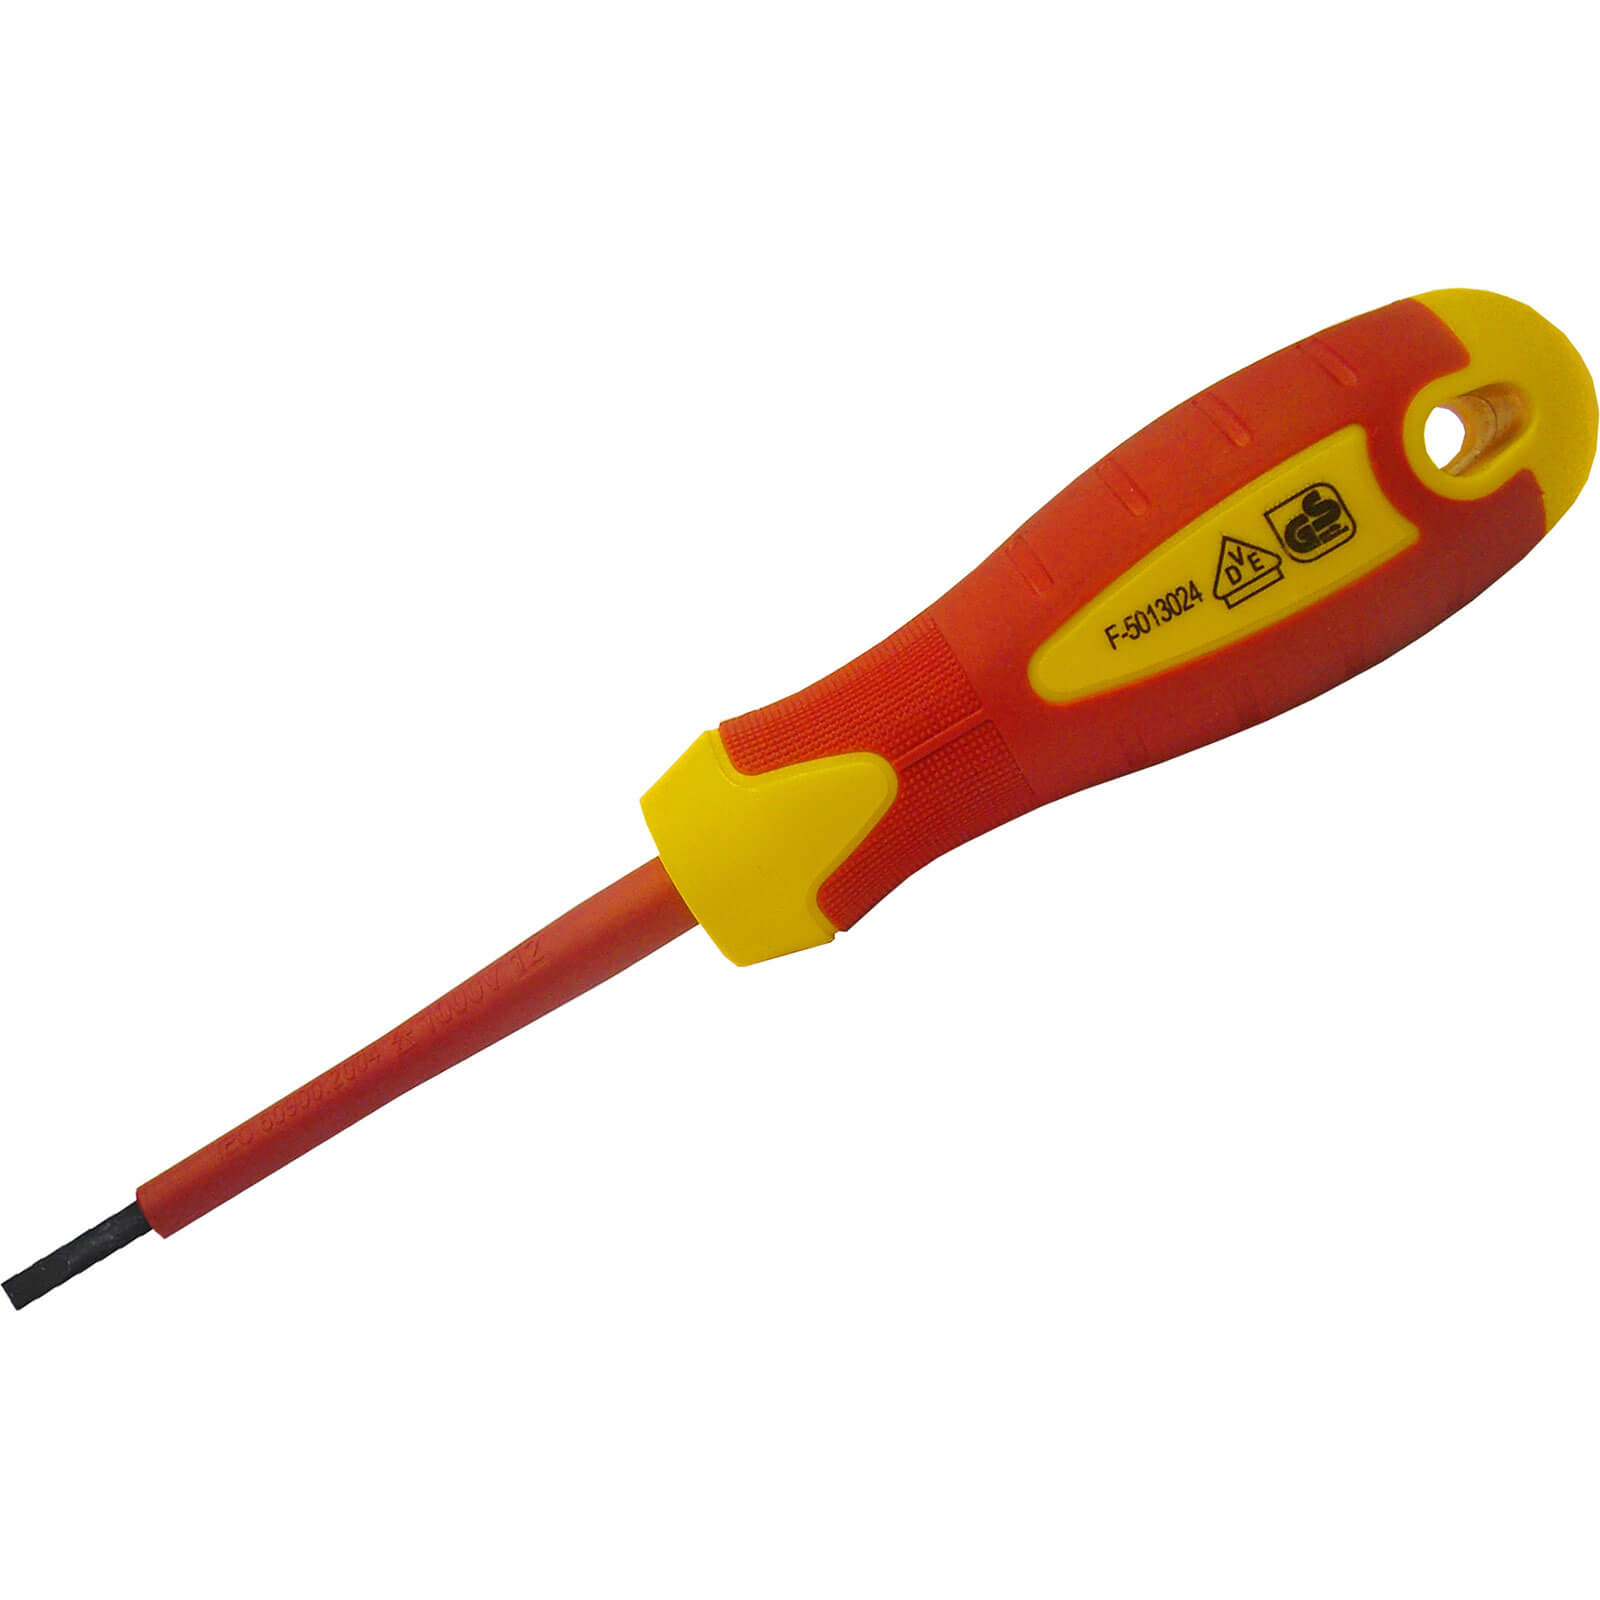 Photo of Faithfull Vde Insulated Soft Grip Slotted Screwdriver 5.5mm 125mm